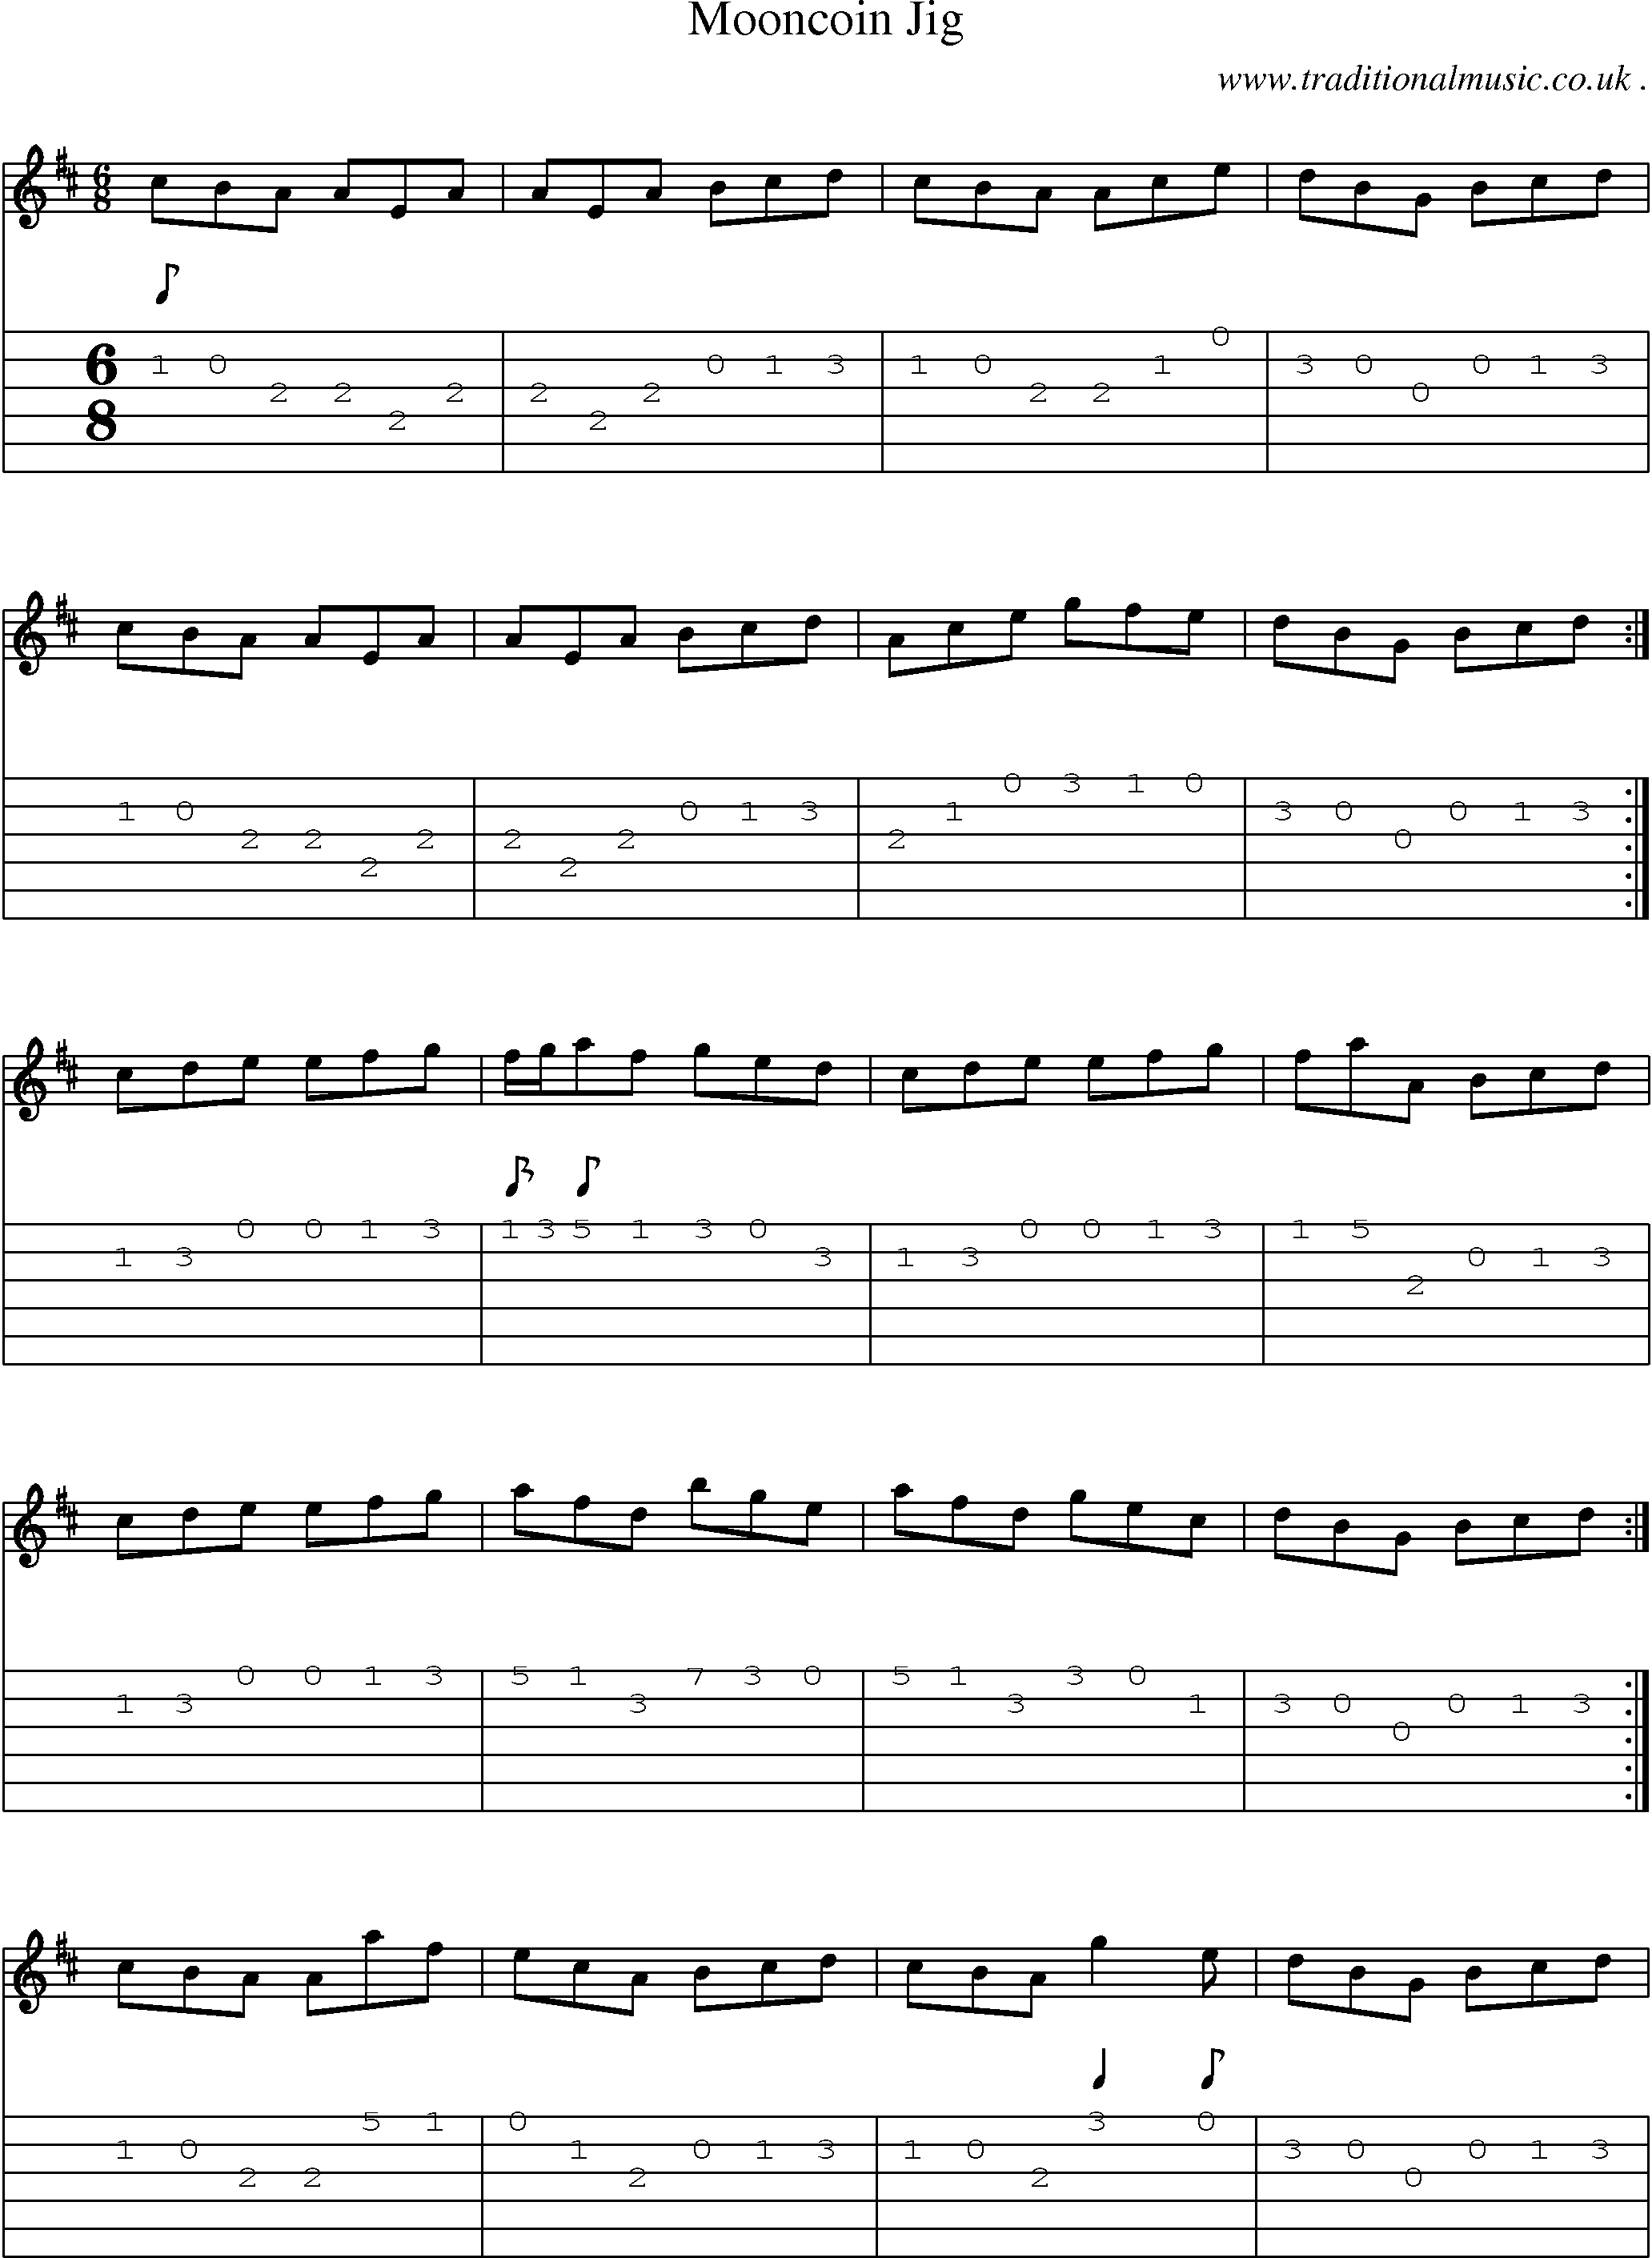 Sheet-Music and Guitar Tabs for Mooncoin Jig